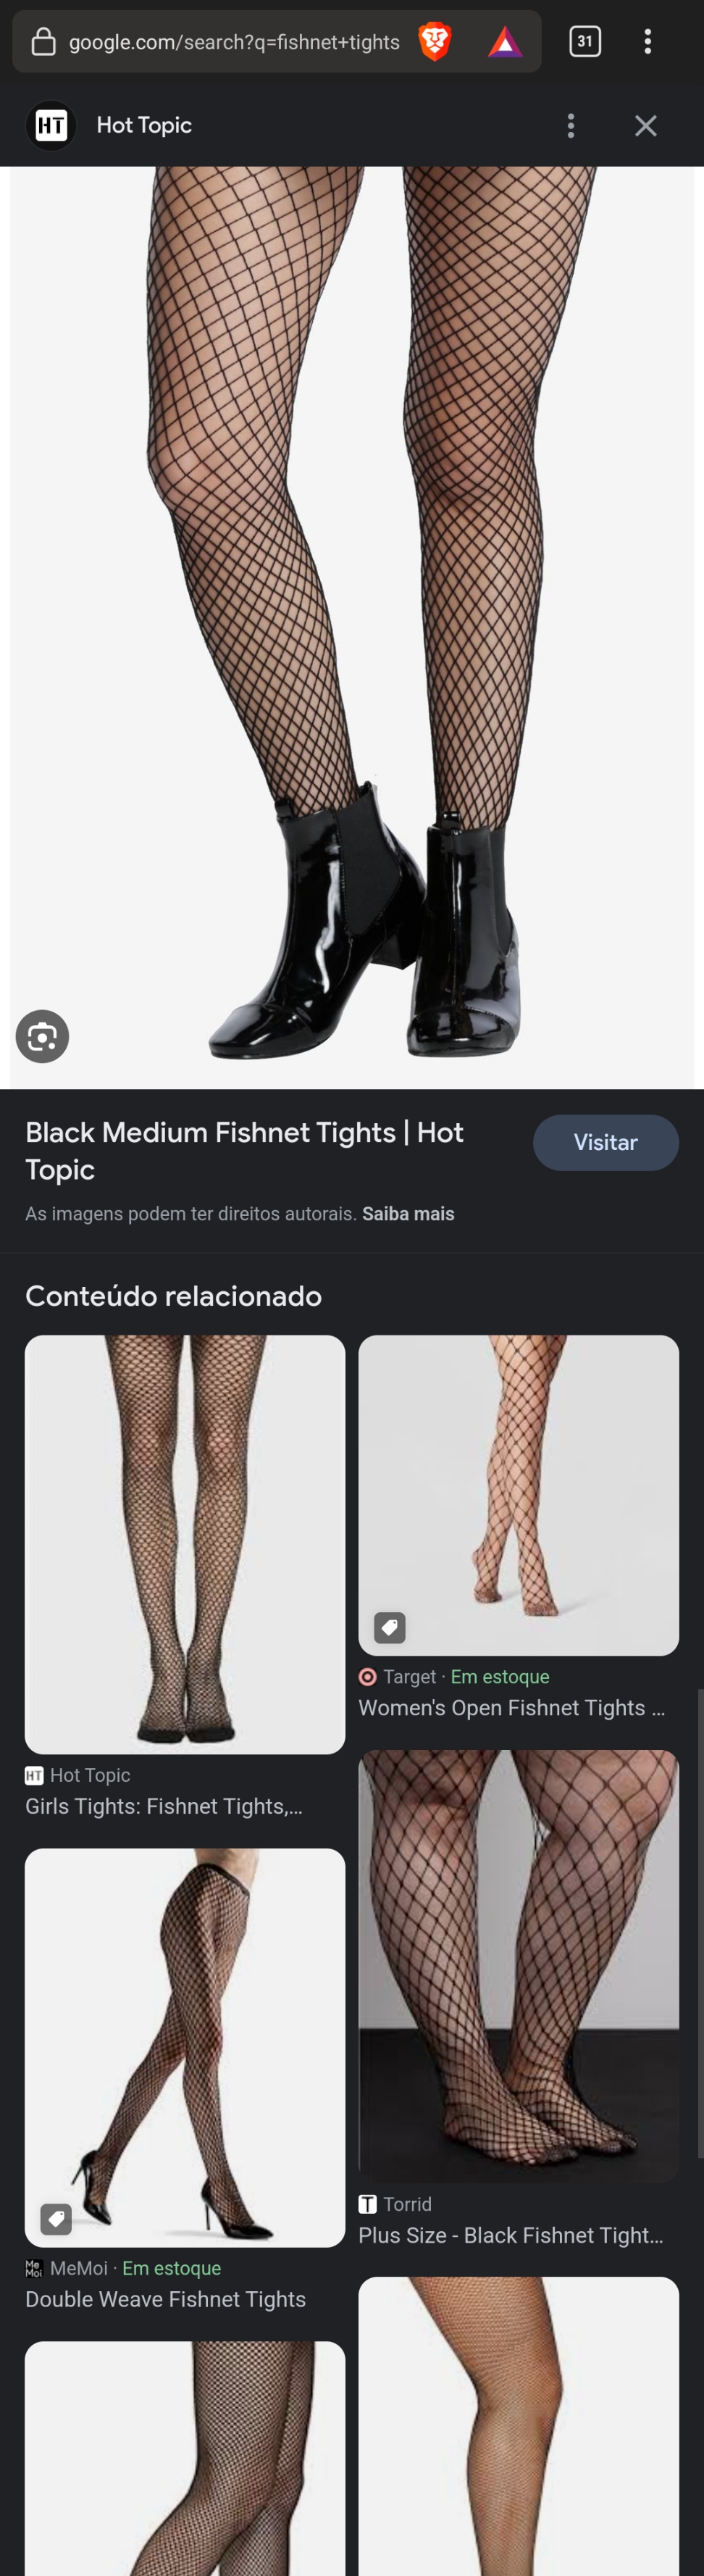 Double Weave Fishnet Tights